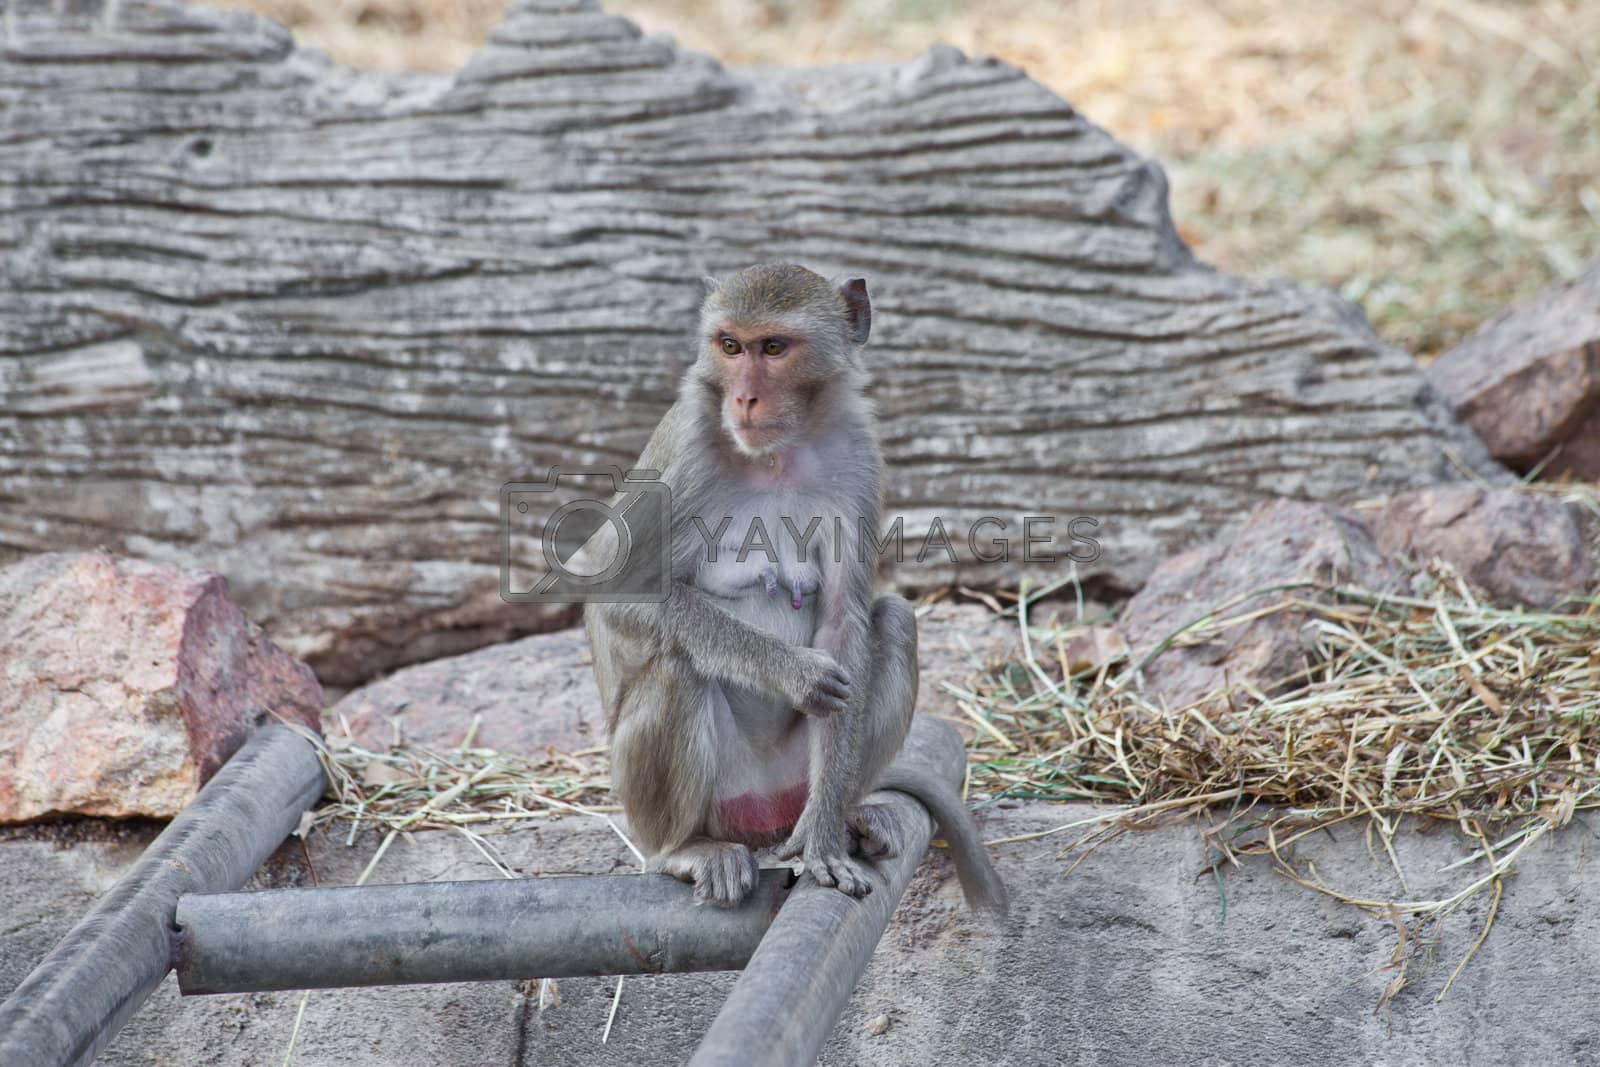 Royalty free image of Monkey in a zoo by pinkblue